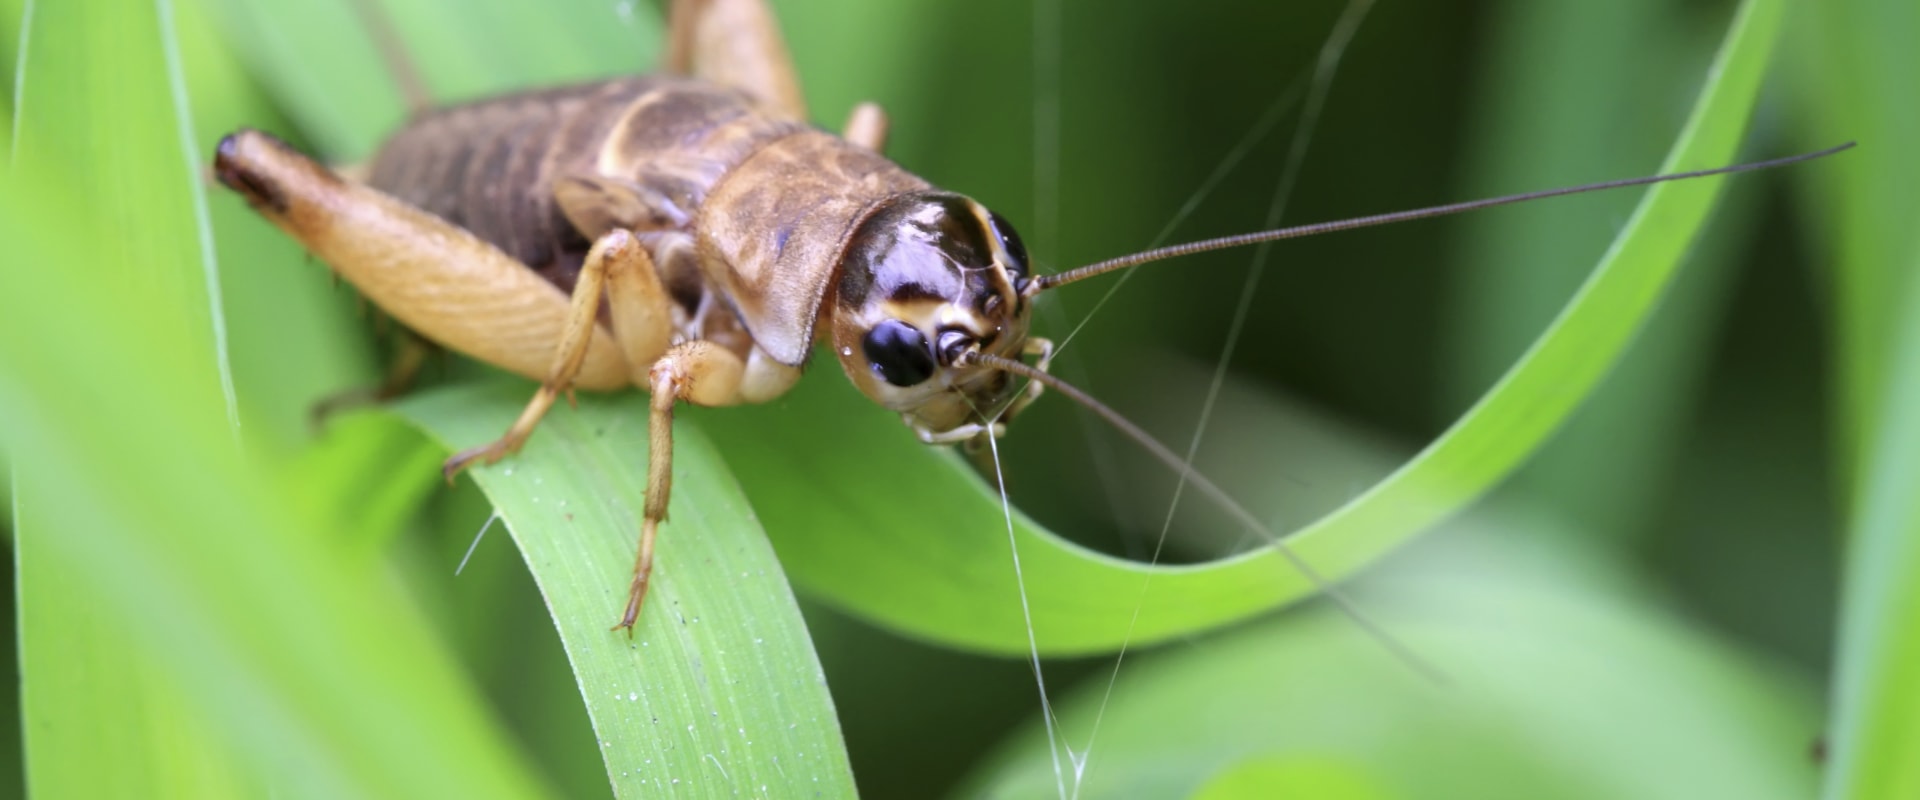 Can crickets predict weather?